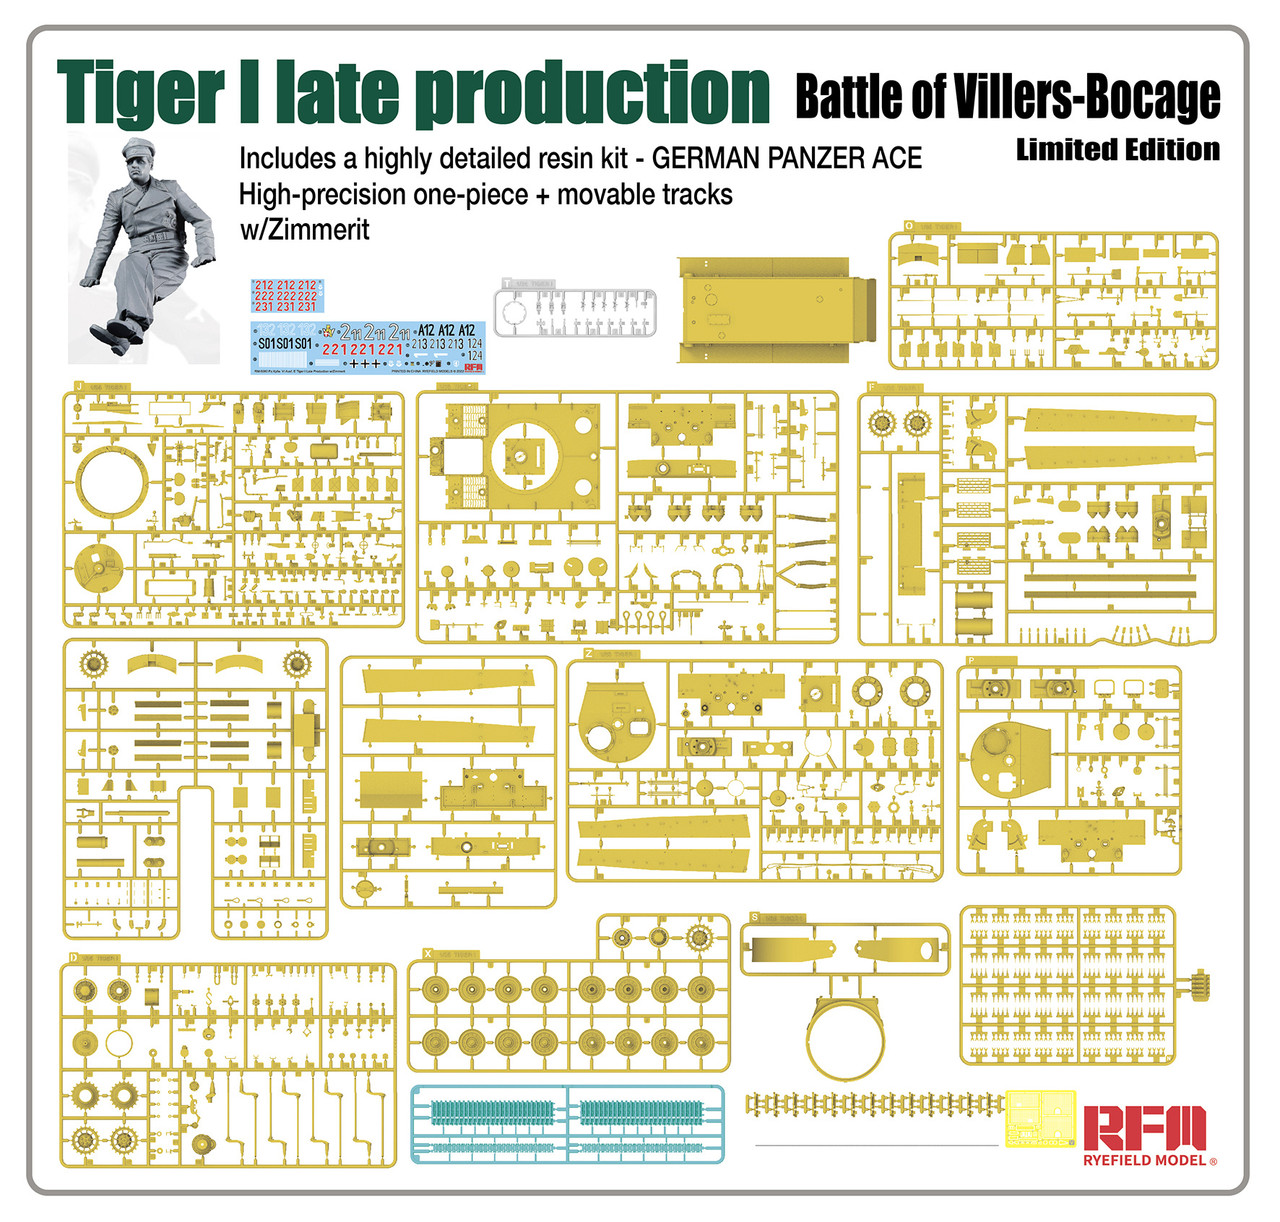 1/35 Tiger I late production (Battle of Villers-Bocage) w/Zimmerit, Includes a highly detailed resin kit - RM5101